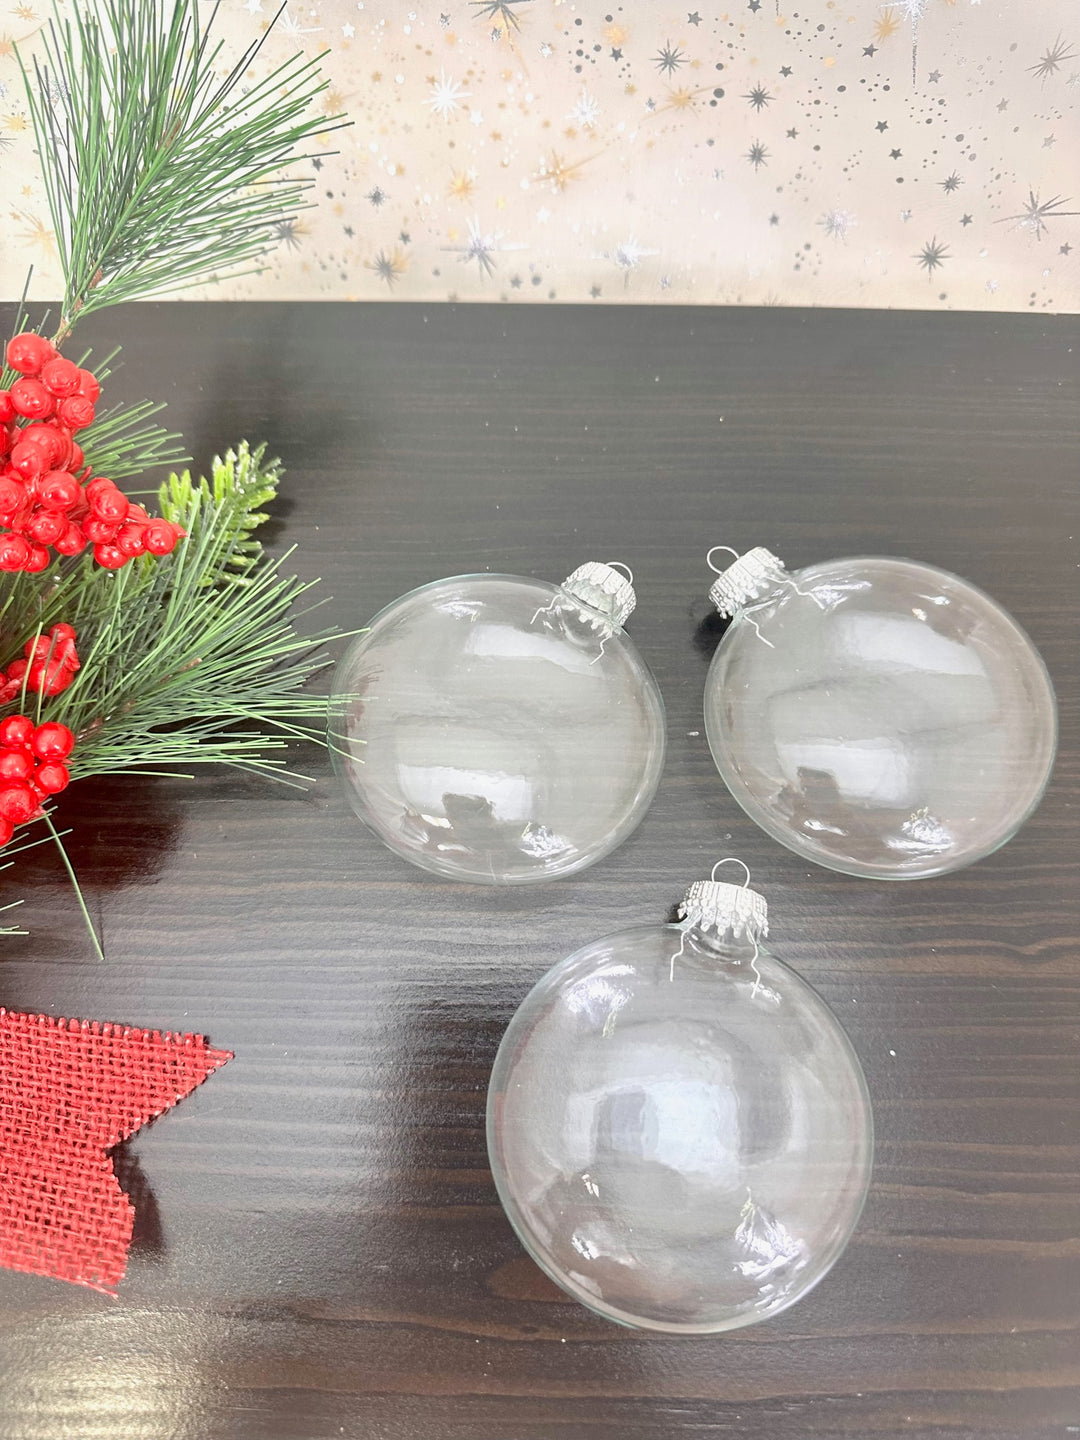 Christmas By Krebs 3" (76mm) Craft Glass Ornament [6 Pieces], Designer Heirloom  (Clear Craft Disc Silver Crown Caps)